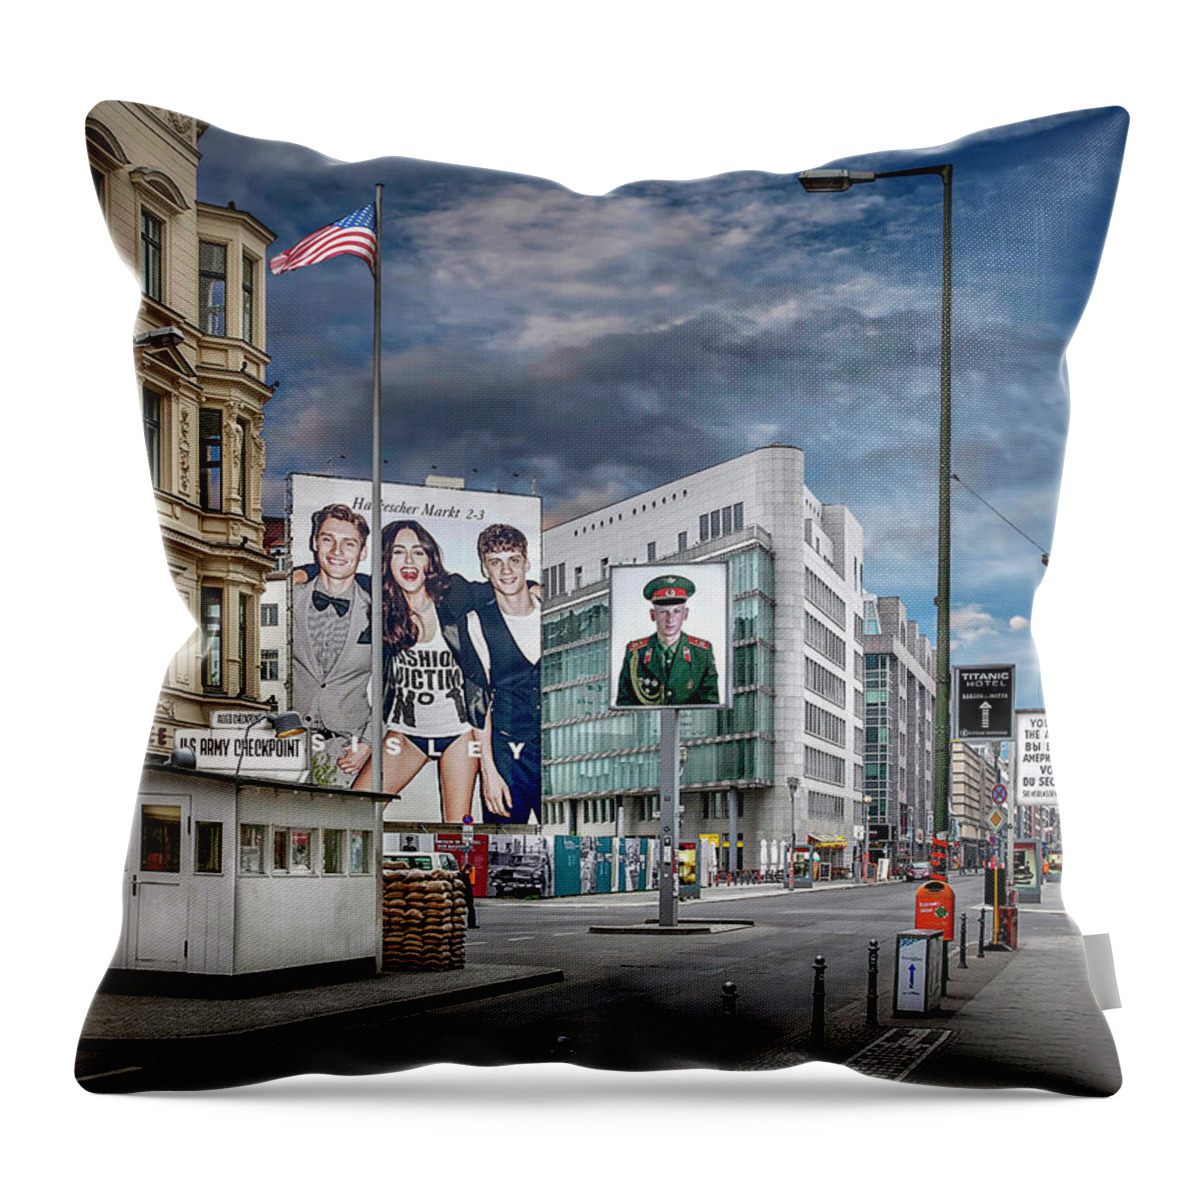 Endre Throw Pillow featuring the photograph Checkpoint Charlie In 2011 by Endre Balogh